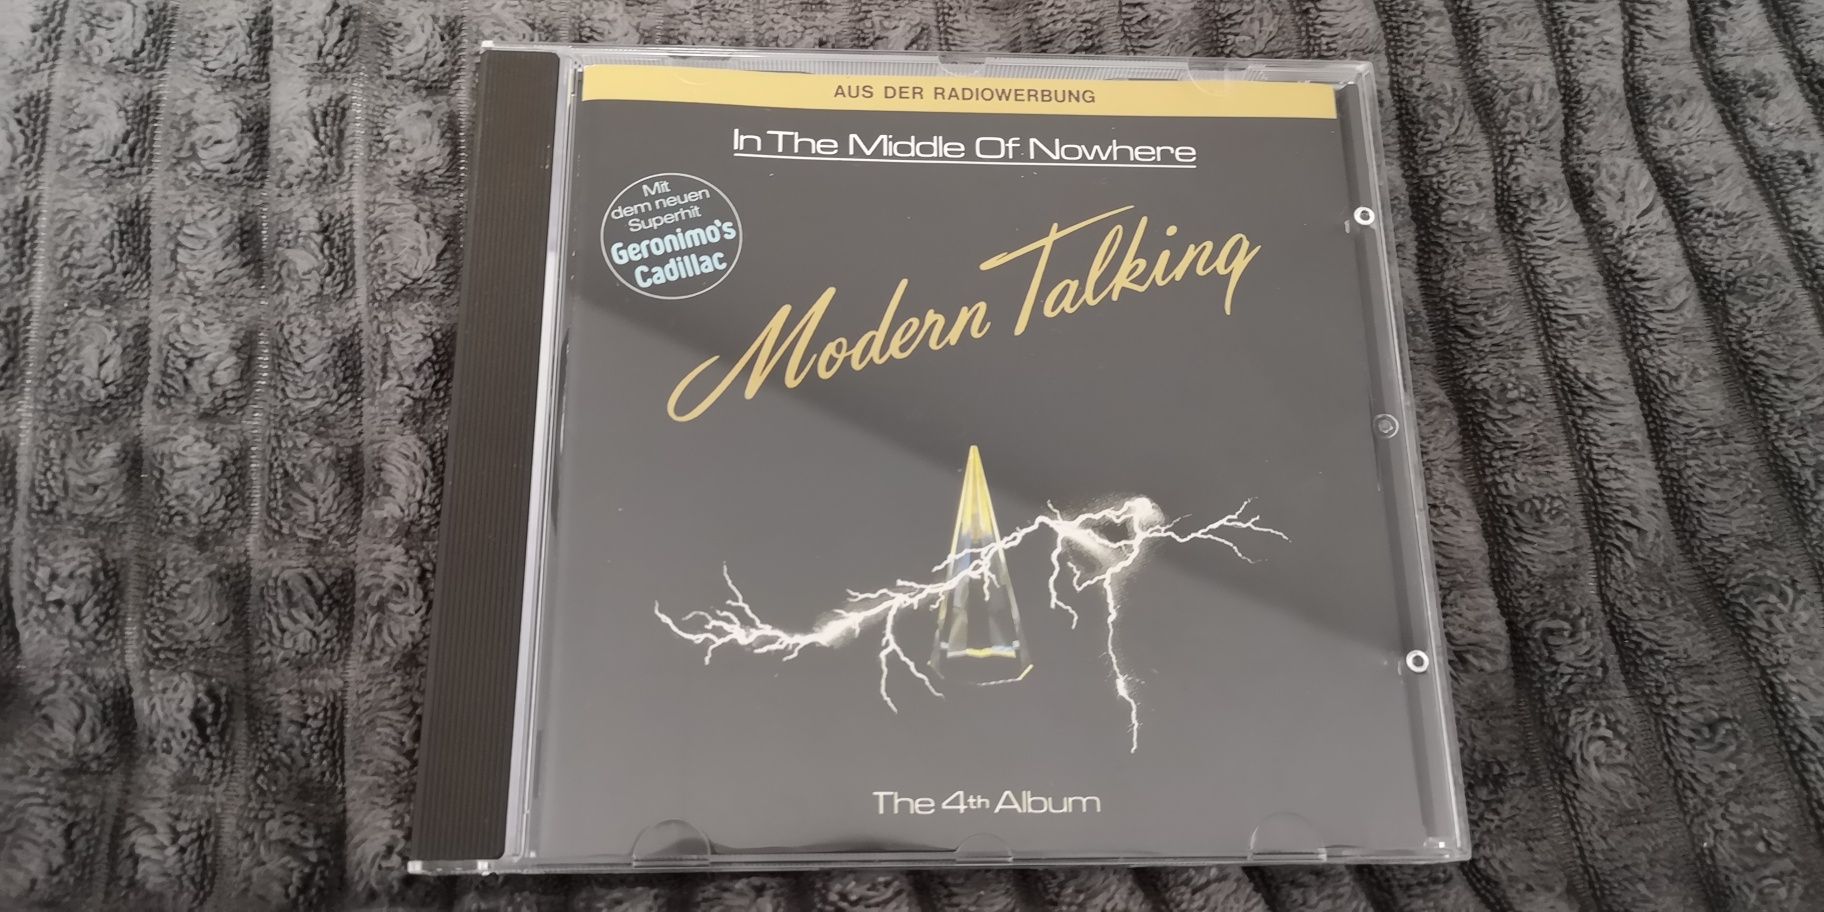 Modern Talking - In The Middle of Nowhere. 1988r